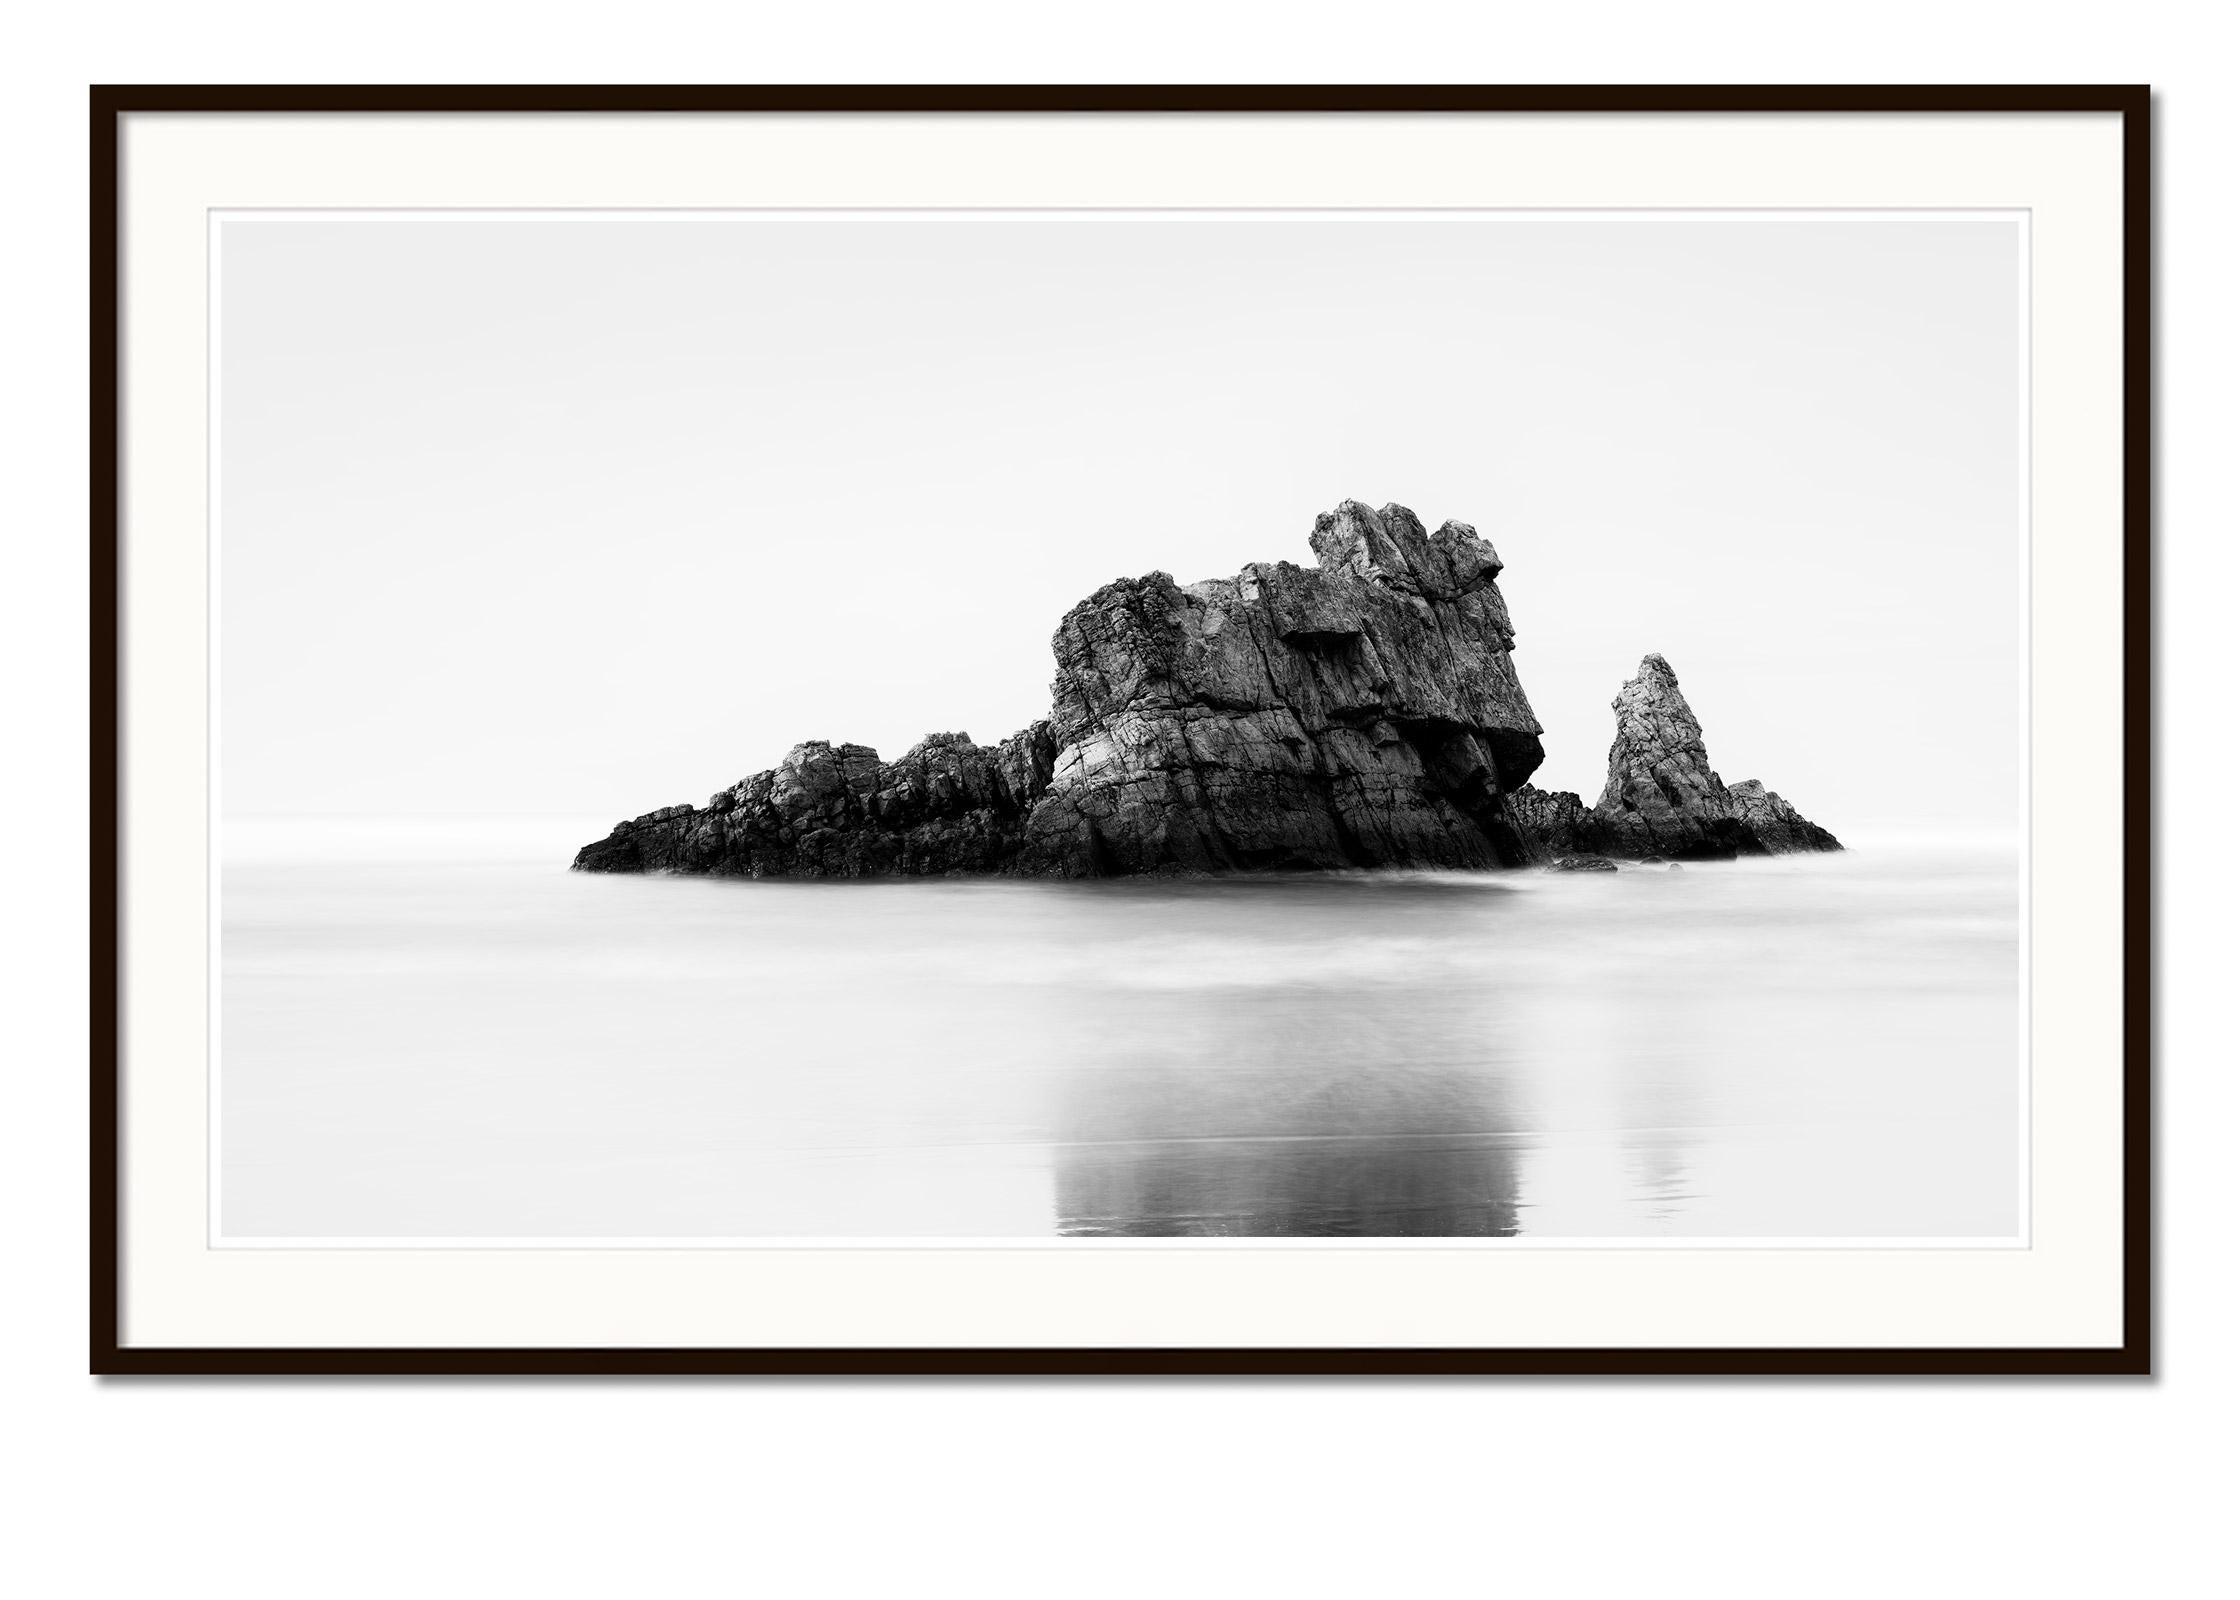 Black and White Fine Art Panorama Landscape. Archival pigment ink print, edition of 8. Signed, titled, dated and numbered by artist. Certificate of authenticity included. Printed with 4cm white border.
International award winner photographer -